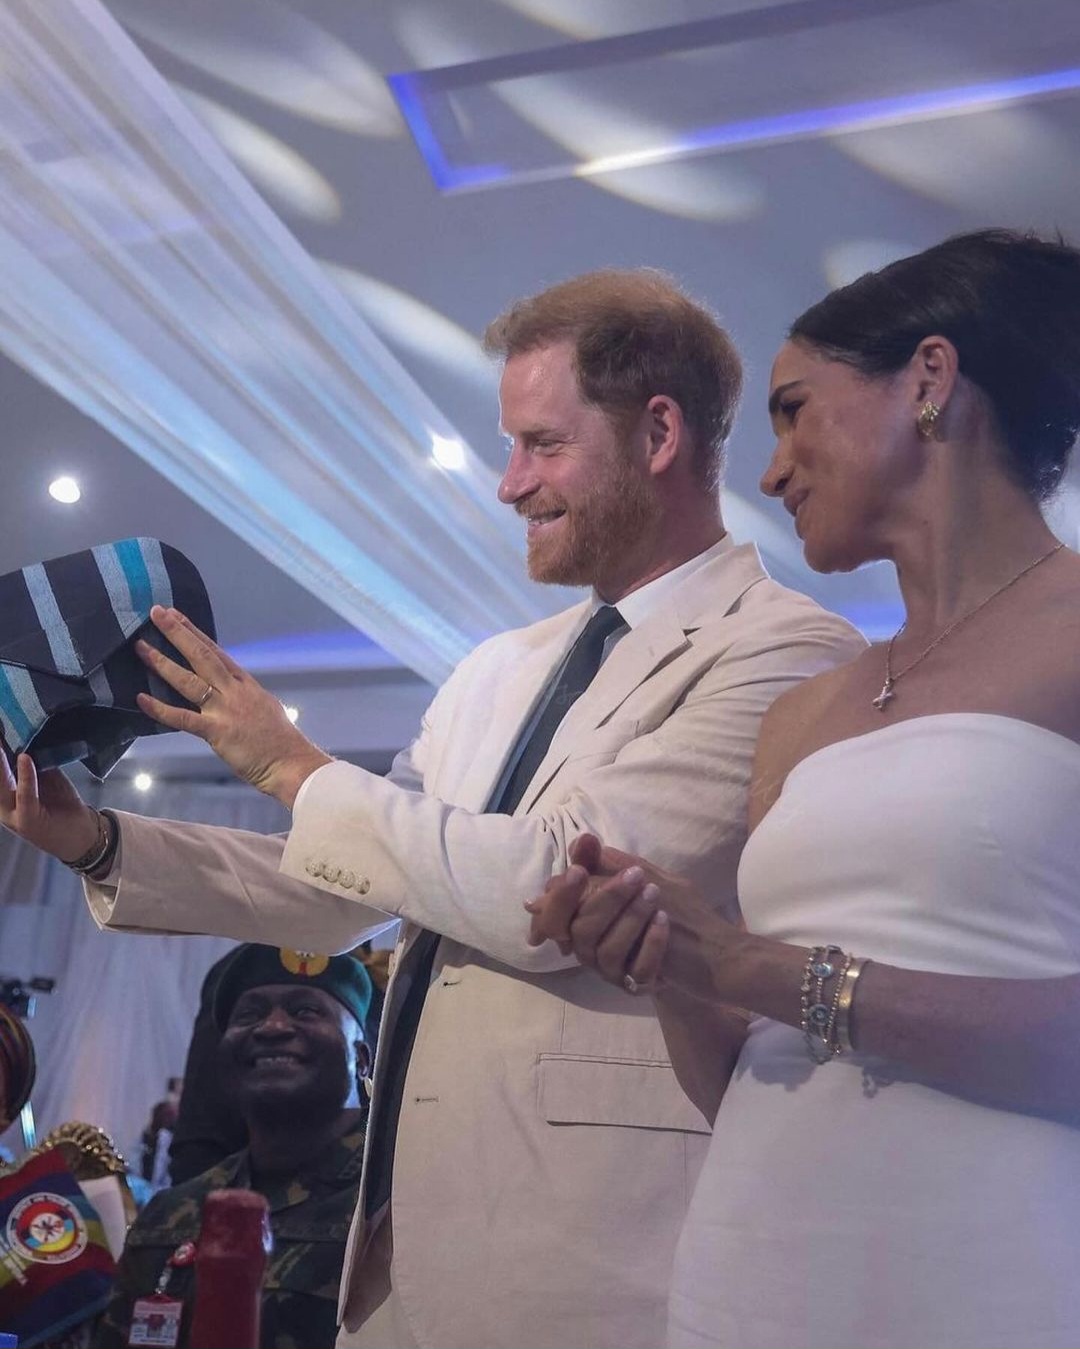 Prince Harry and Meghan Markle attend a reception hosted by the Chief of Defense Staff (photos/video)